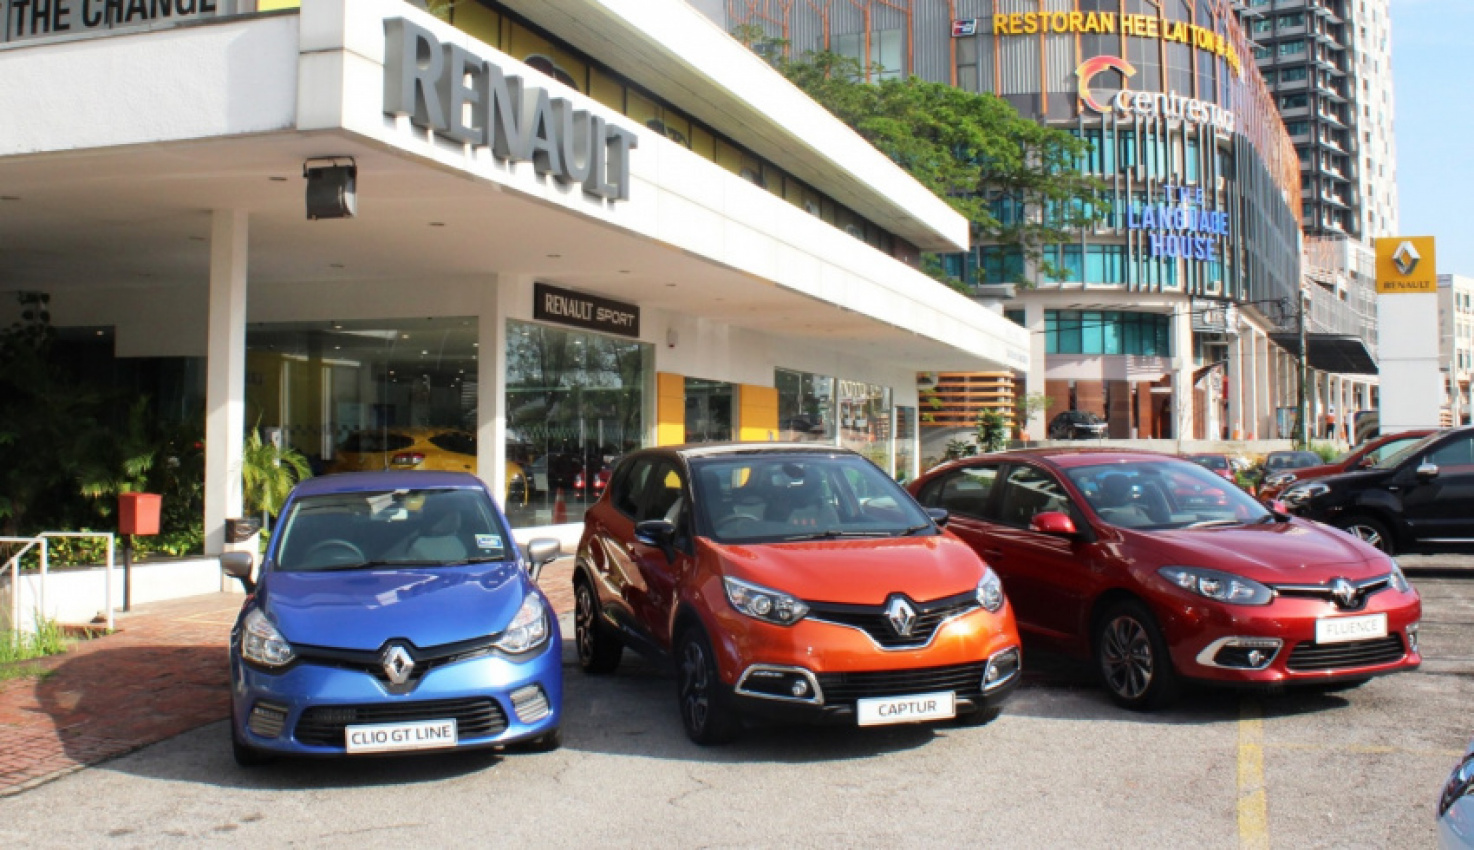 autos, car brands, cars, renault, captur, clio gt, fluence, koleos, megane, tc euro cars, renault malaysia confirms prices remain unchanged in 2016